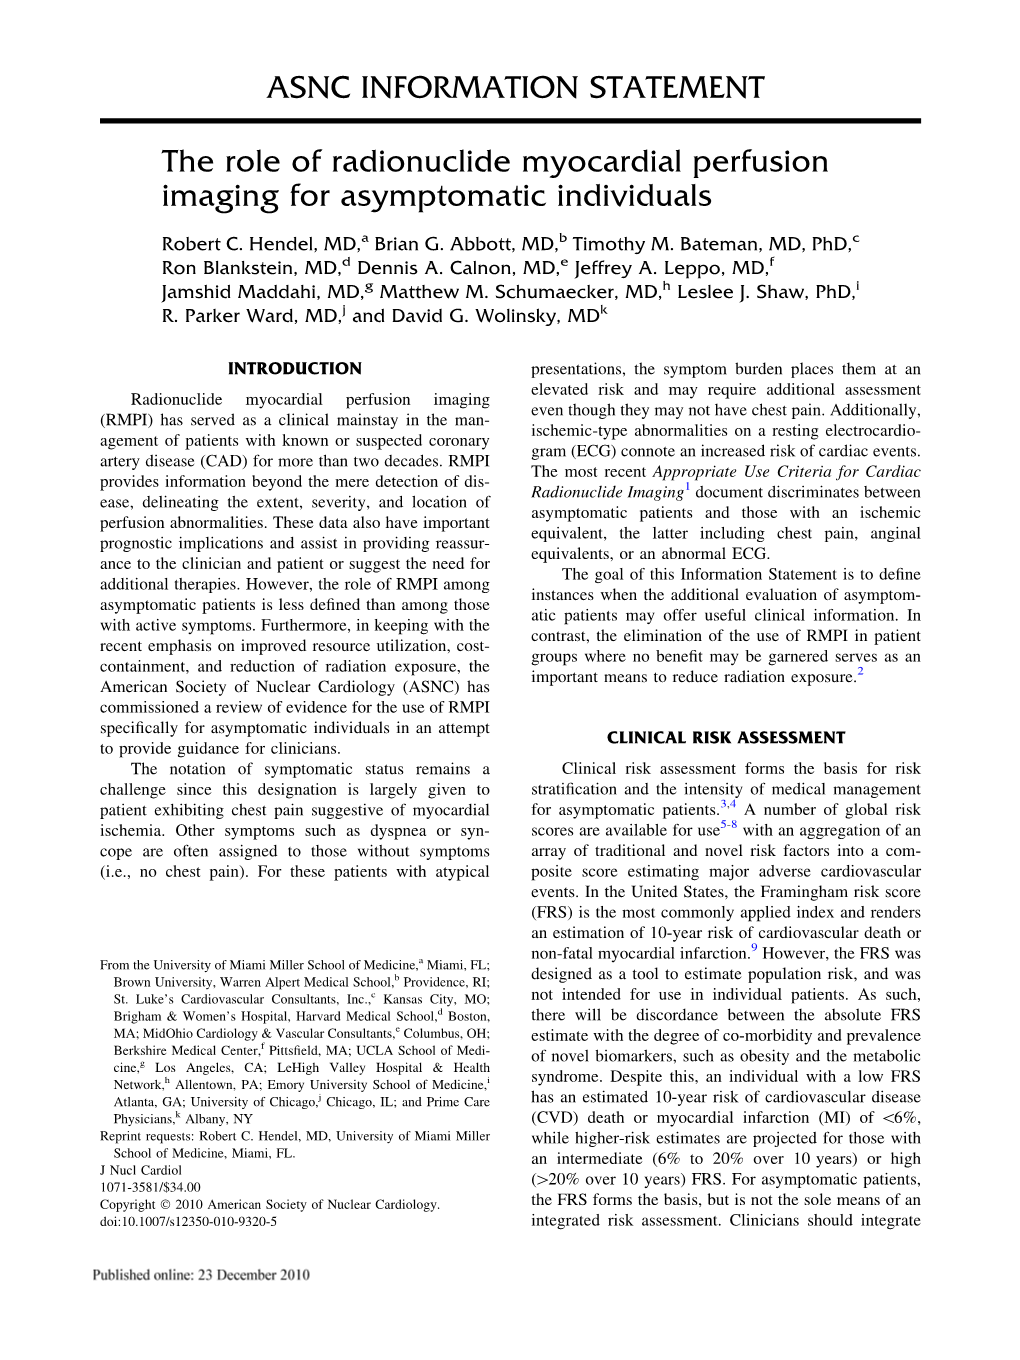 The Role of Radionuclide Myocardial Perfusion Imaging for Asymptomatic Individuals